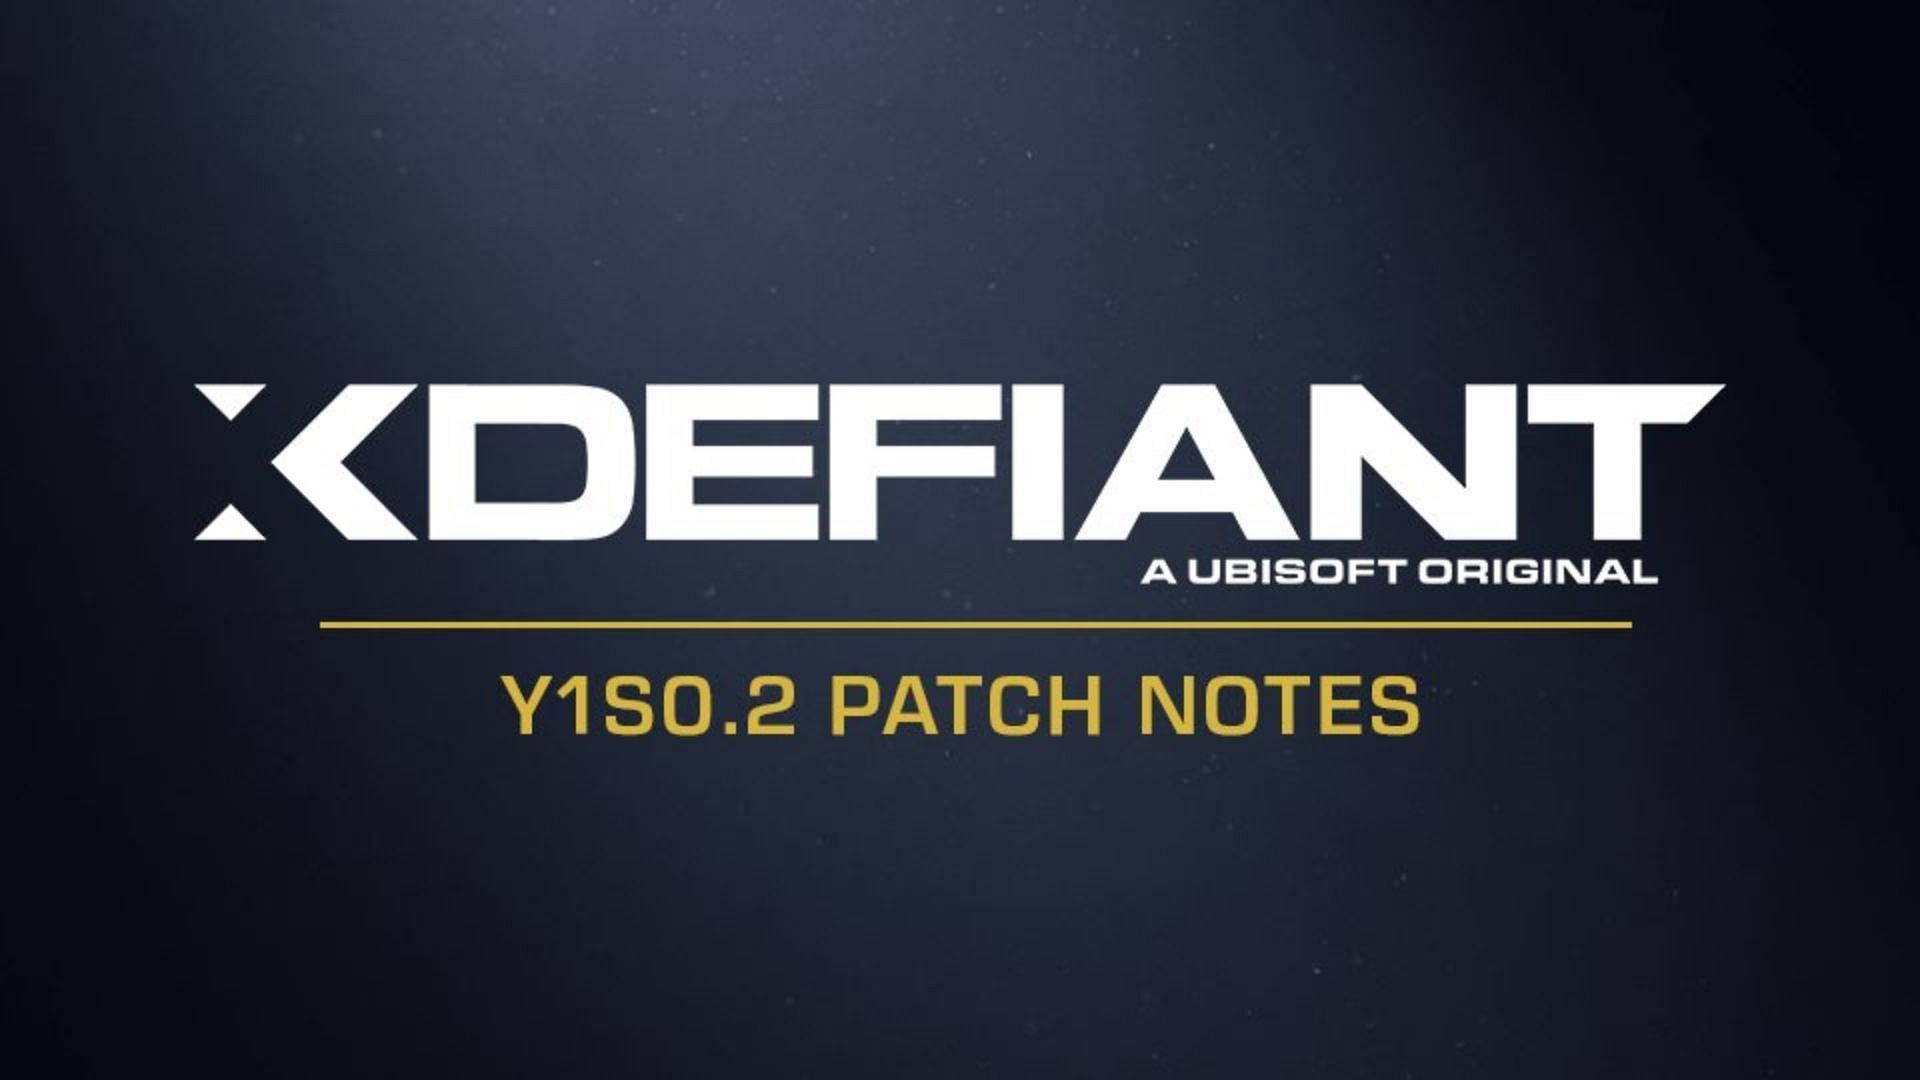 XDefiant patch notes Y1S0.2 update (Image via X/@XDefiant)